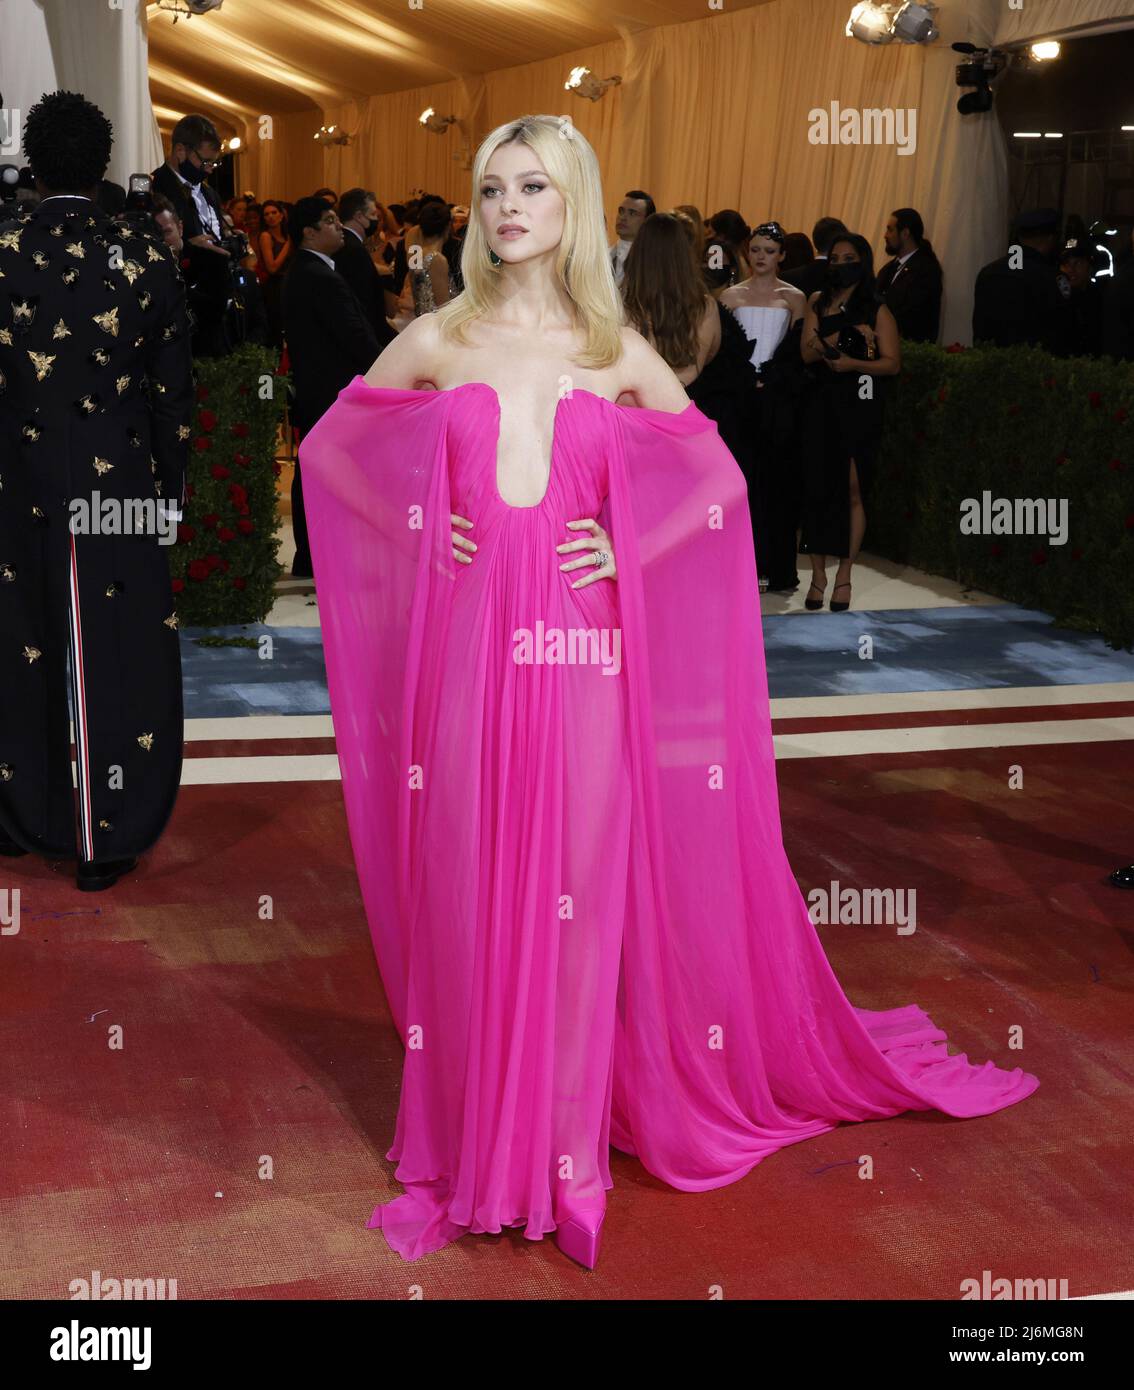 New York, United States. 03rd May, 2022. Nicola Peltz arrives on the red carpet for The Met Gala at The Metropolitan Museum of Art celebrating the Costume Institute opening of 'In America: An Anthology of Fashion' in New York City on Monday, May 2, 2022. Photo by John Angelillo/UPI Credit: UPI/Alamy Live News Stock Photo